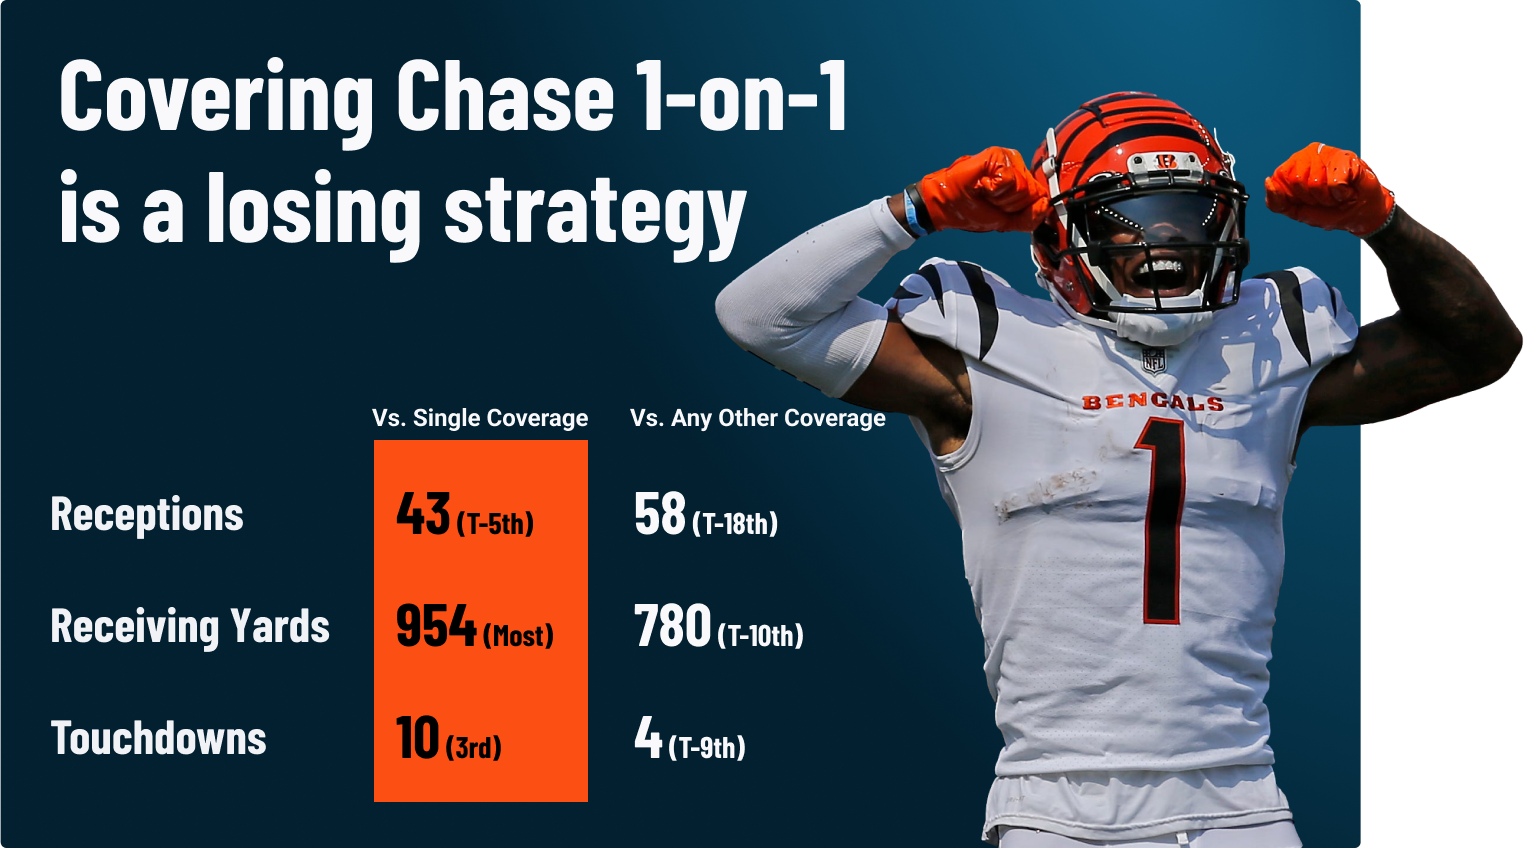 Jamar Chase PFF Custom built graphic in 1-on-1 coverage